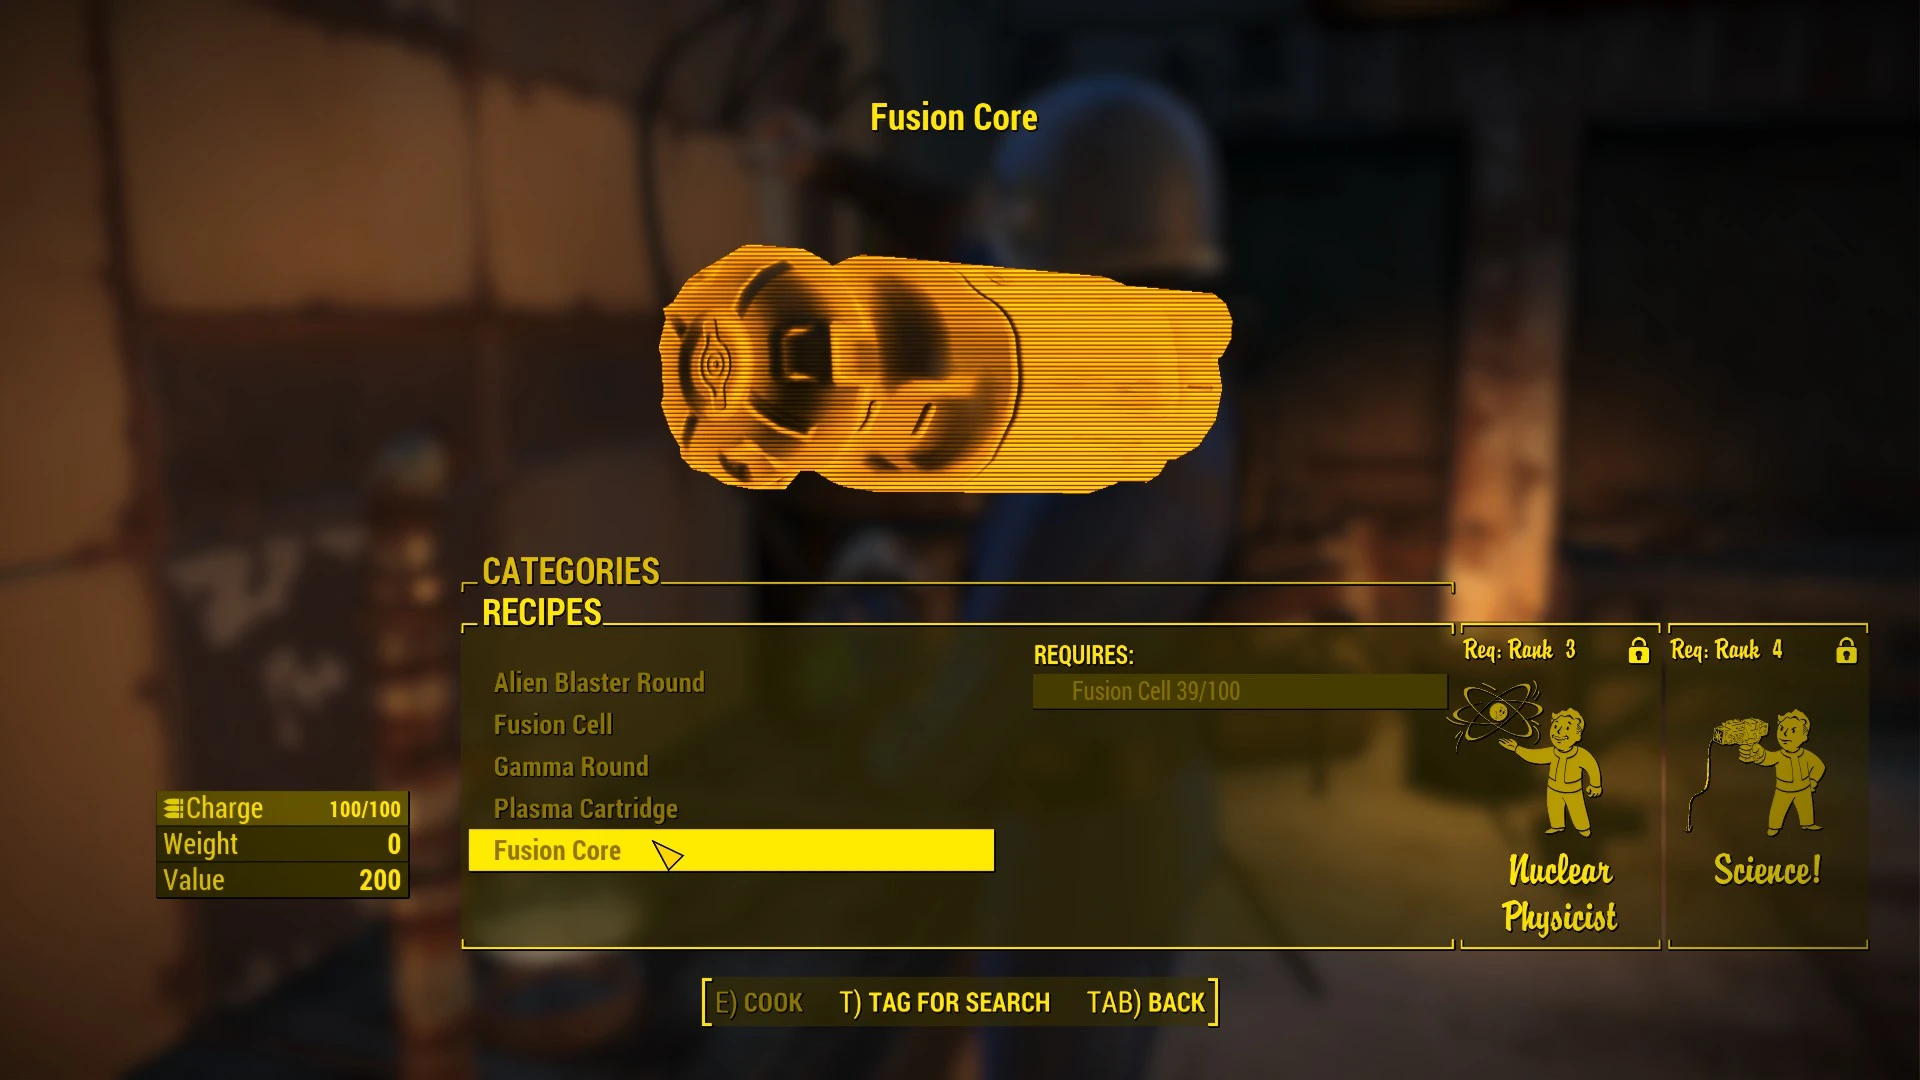 where do i find ammo in fallout 4